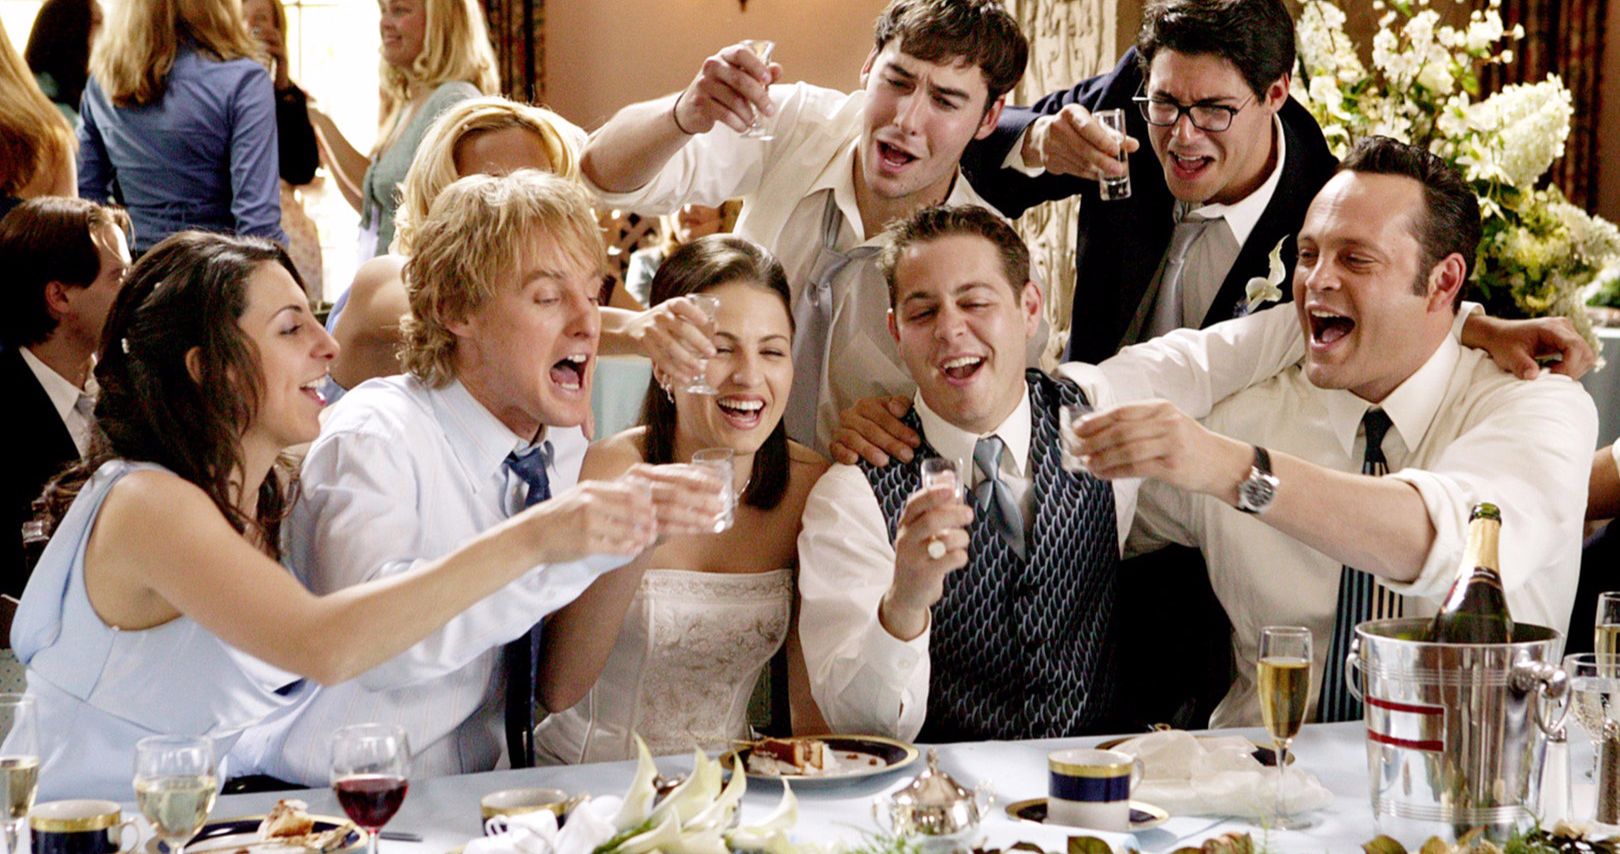 If Wedding Crashers 2 Happens, It'll Have a Very Weird, Difficult, Challenging Story